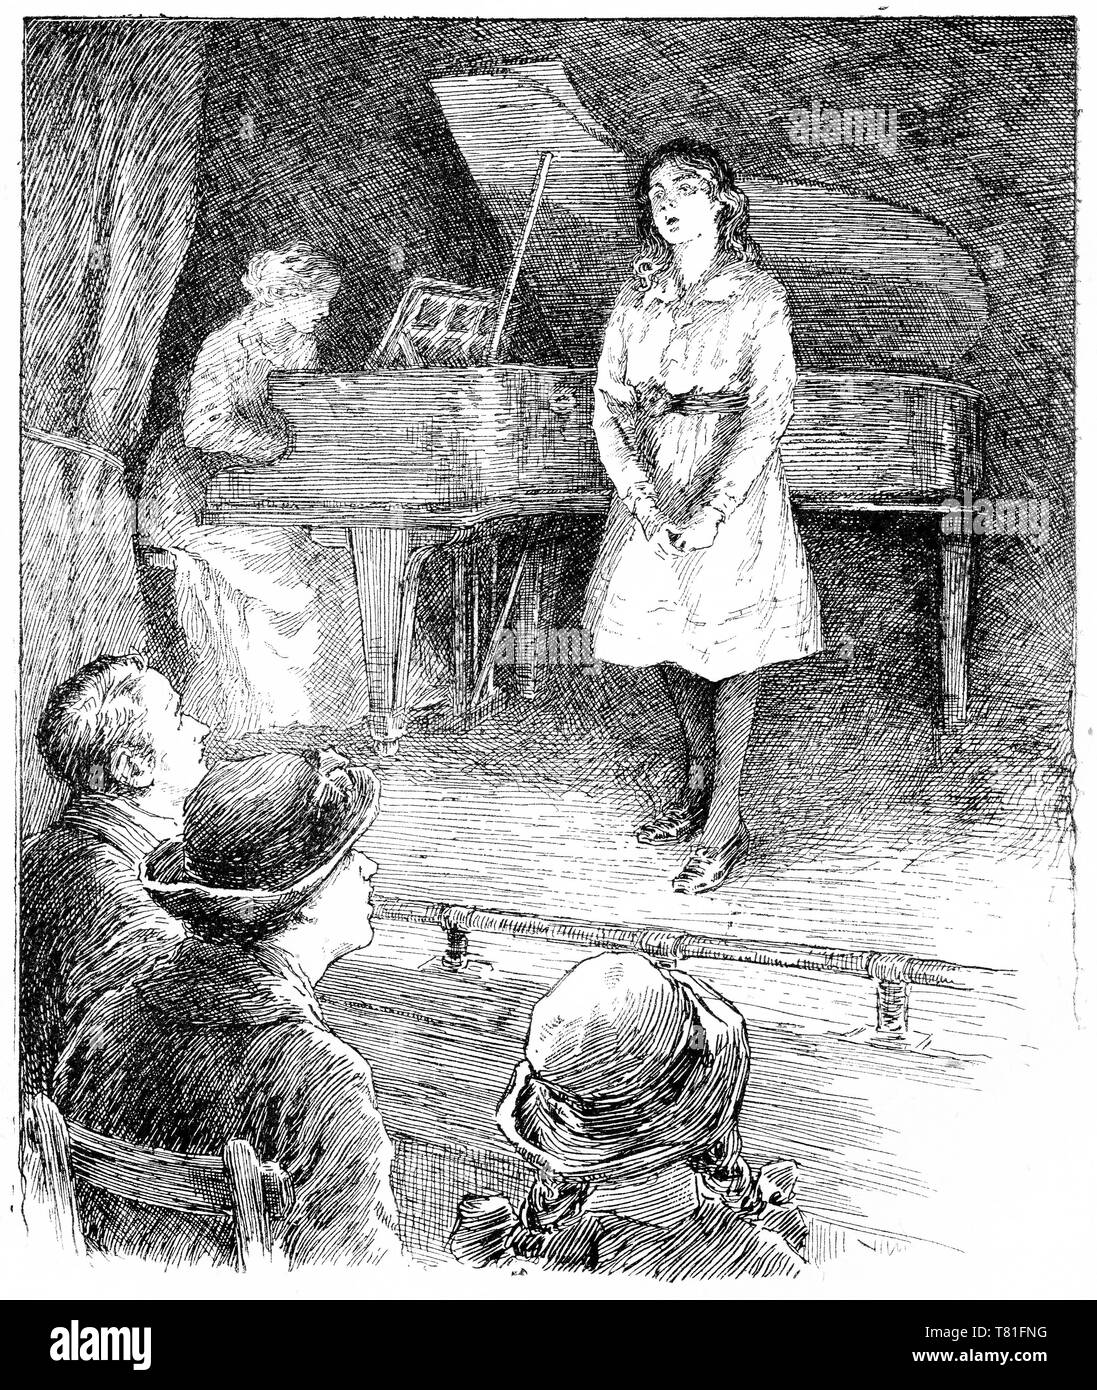 Engraving of a girl singing on a stage before an audience, probably at a school recital. Chatterbox magazine, 1917 Stock Photo